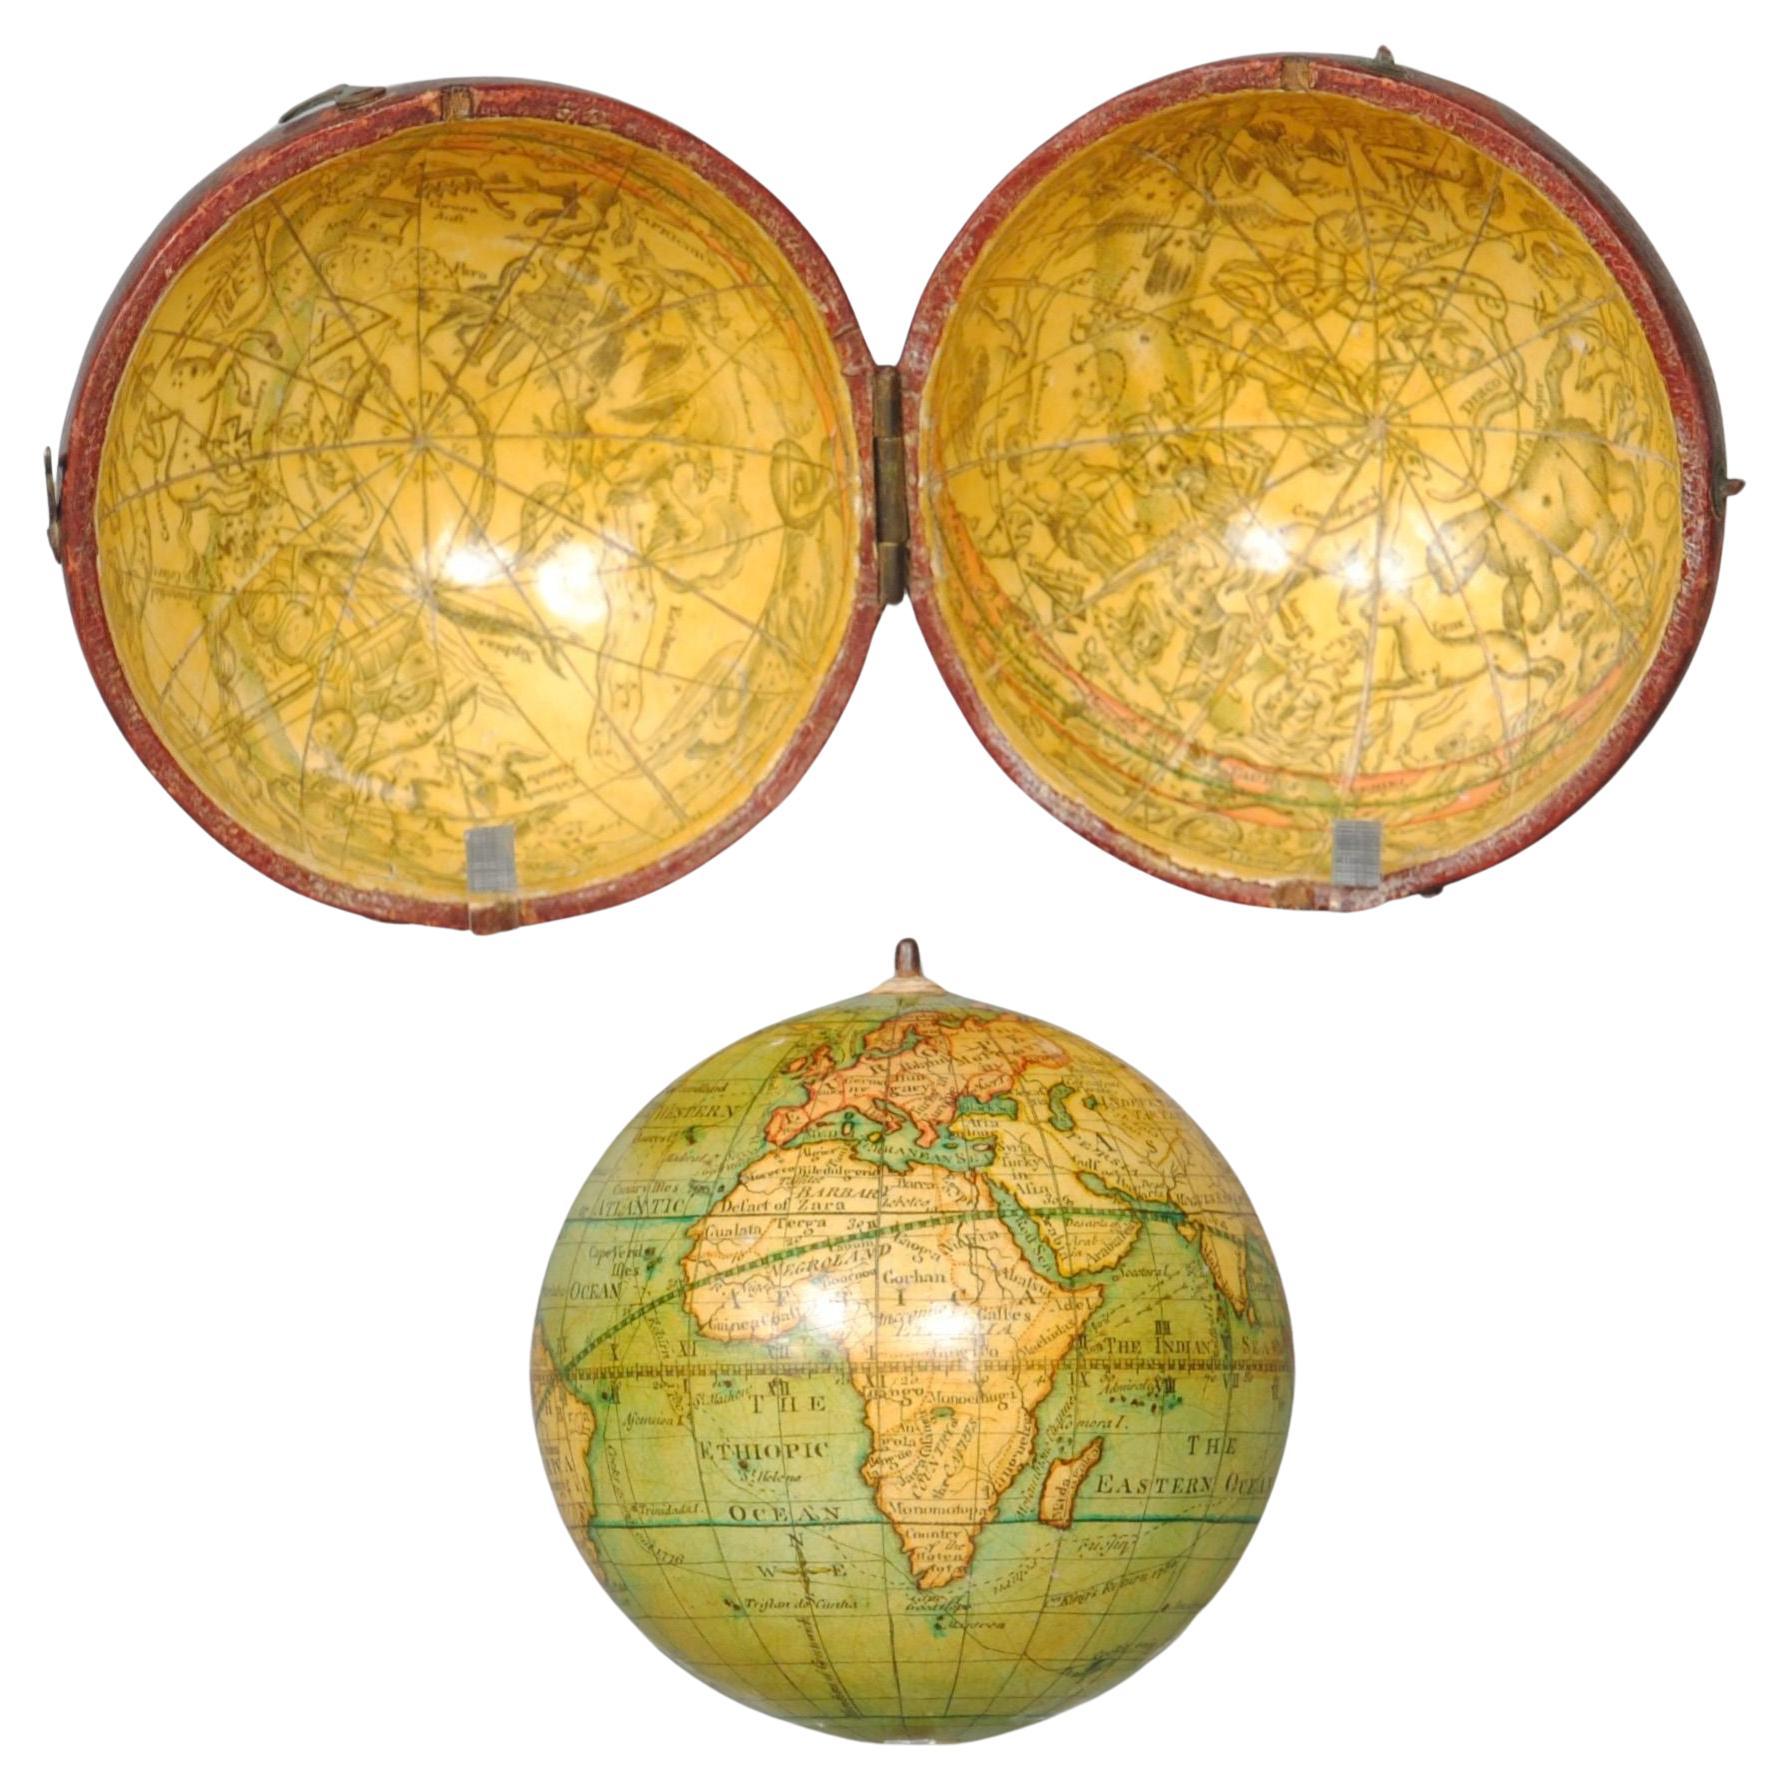 A Fine Example of 3" Pocket Globe by Lane, London